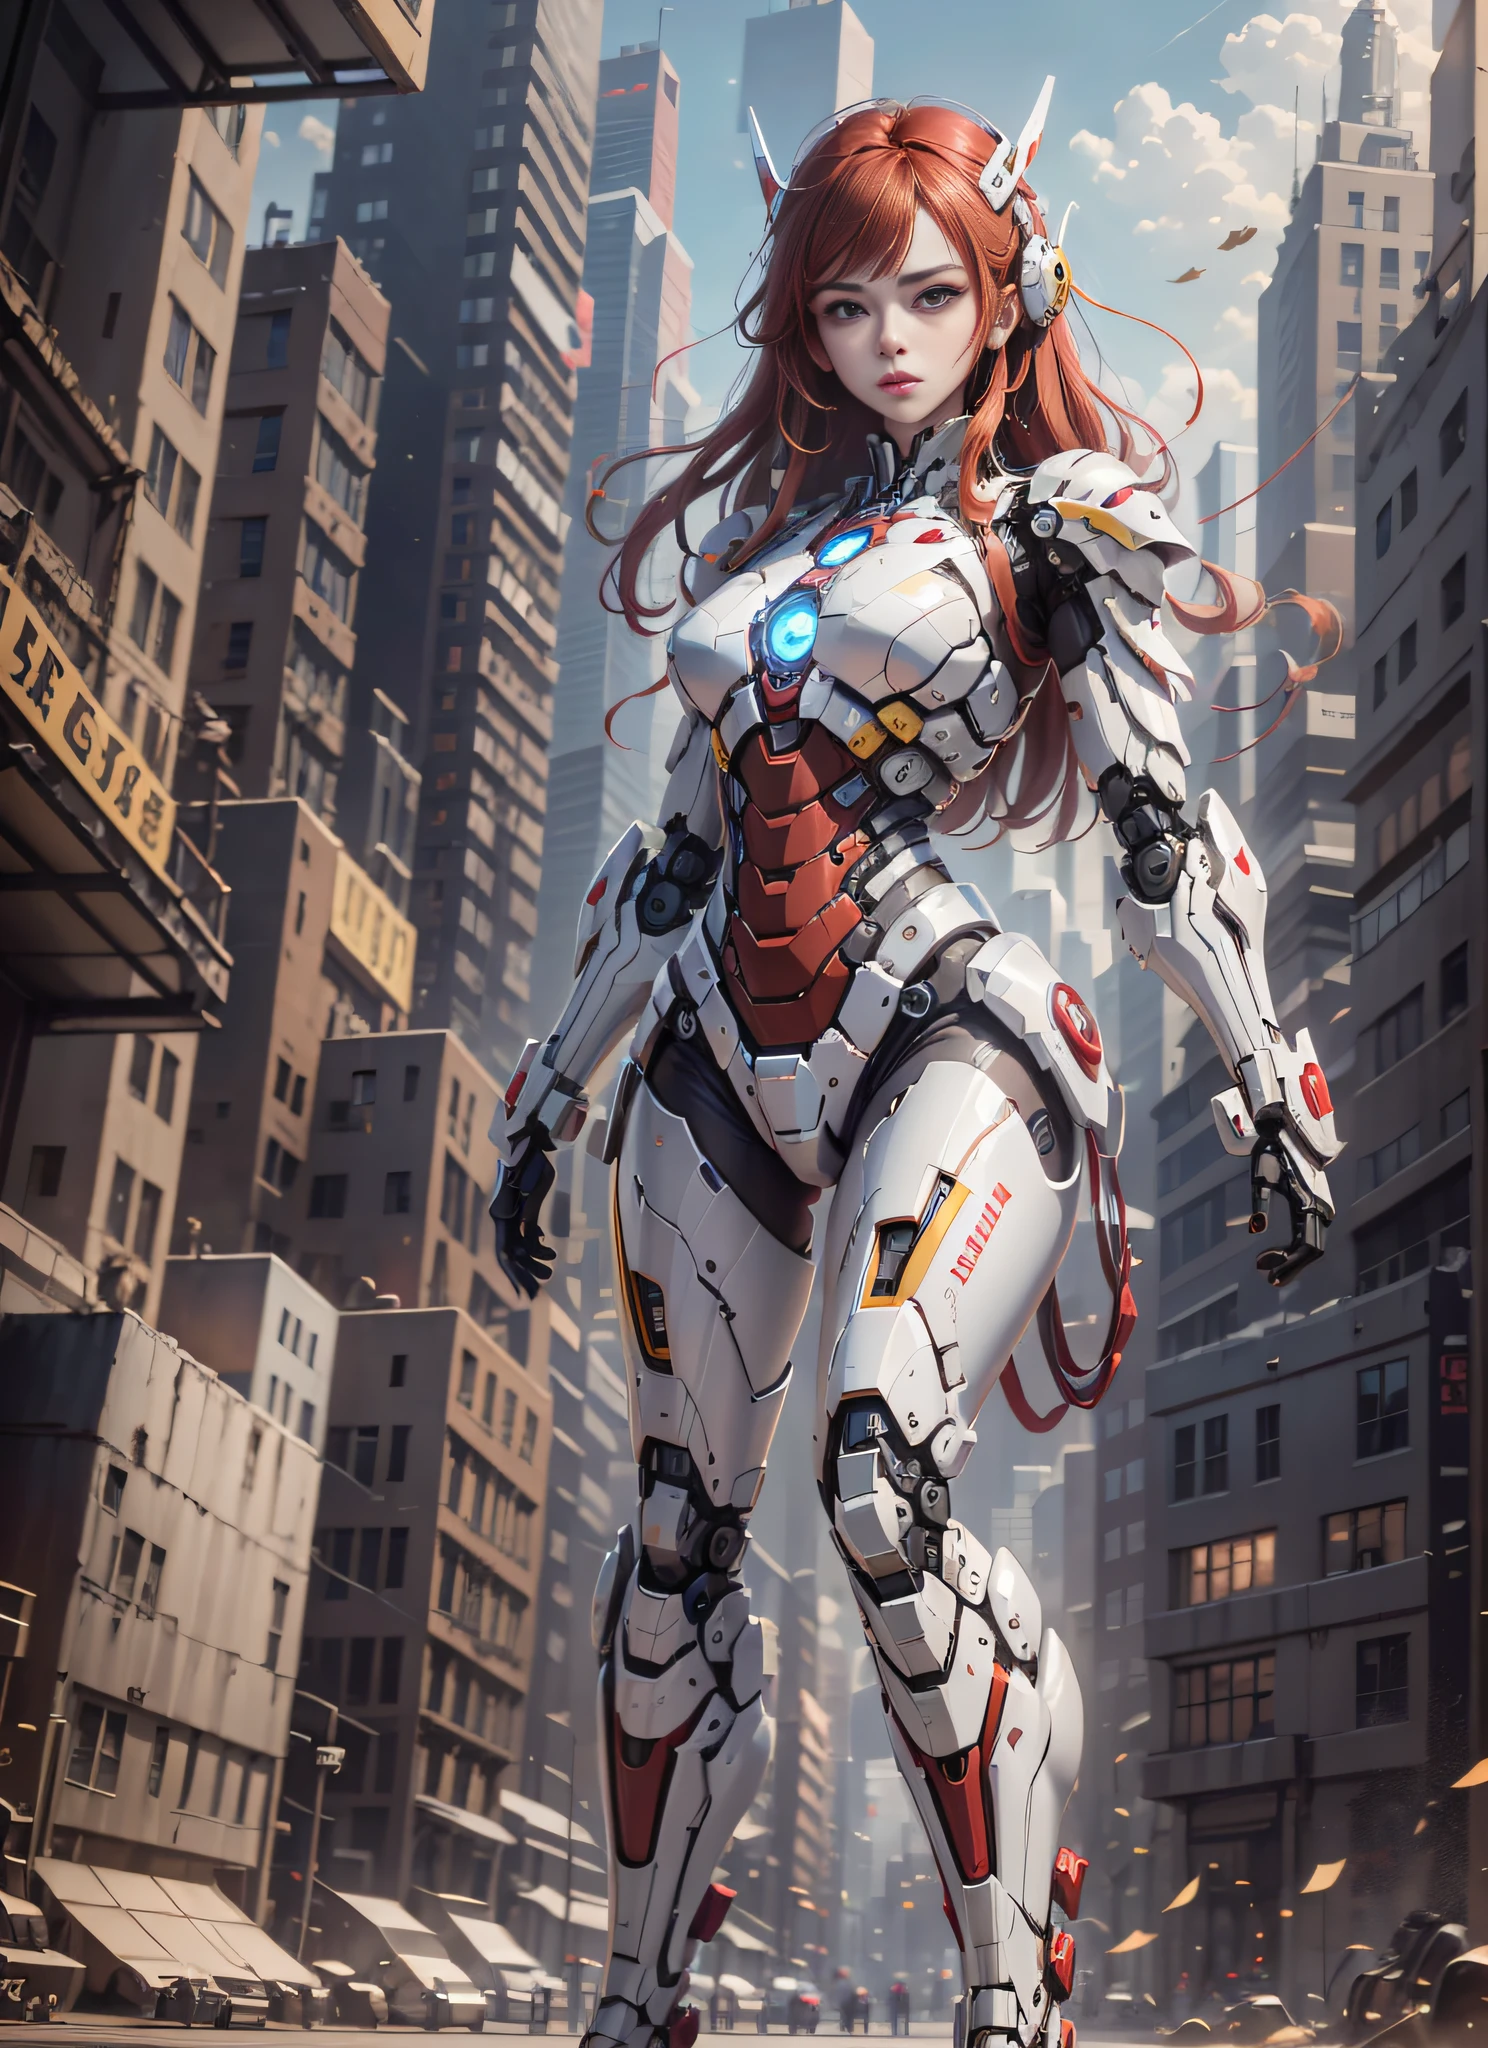 RAW, masterpiece, ultra thin photo, best quality, ultra high resolution, photorealistic, sunlight, full body portrait, incredibly beautiful, dynamic poses, sexy, delicate face, vibrant eyes, (red hair), she is using a futuristic Iron Man engine, red and yellow gold color scheme, highly detailed robot factory background, detailed face, detailed and complex busy background,  messy, gorgeous, milky white, highly detailed skin, realistic skin details, visible pores, sharp focus, volumetric mist, 8k uhd, dslr camera, high quality, film grain, fair skin, photorealism, lomography, expanding metropolis in futuristic dystopia, view from below, translucent, cables connected to robots,